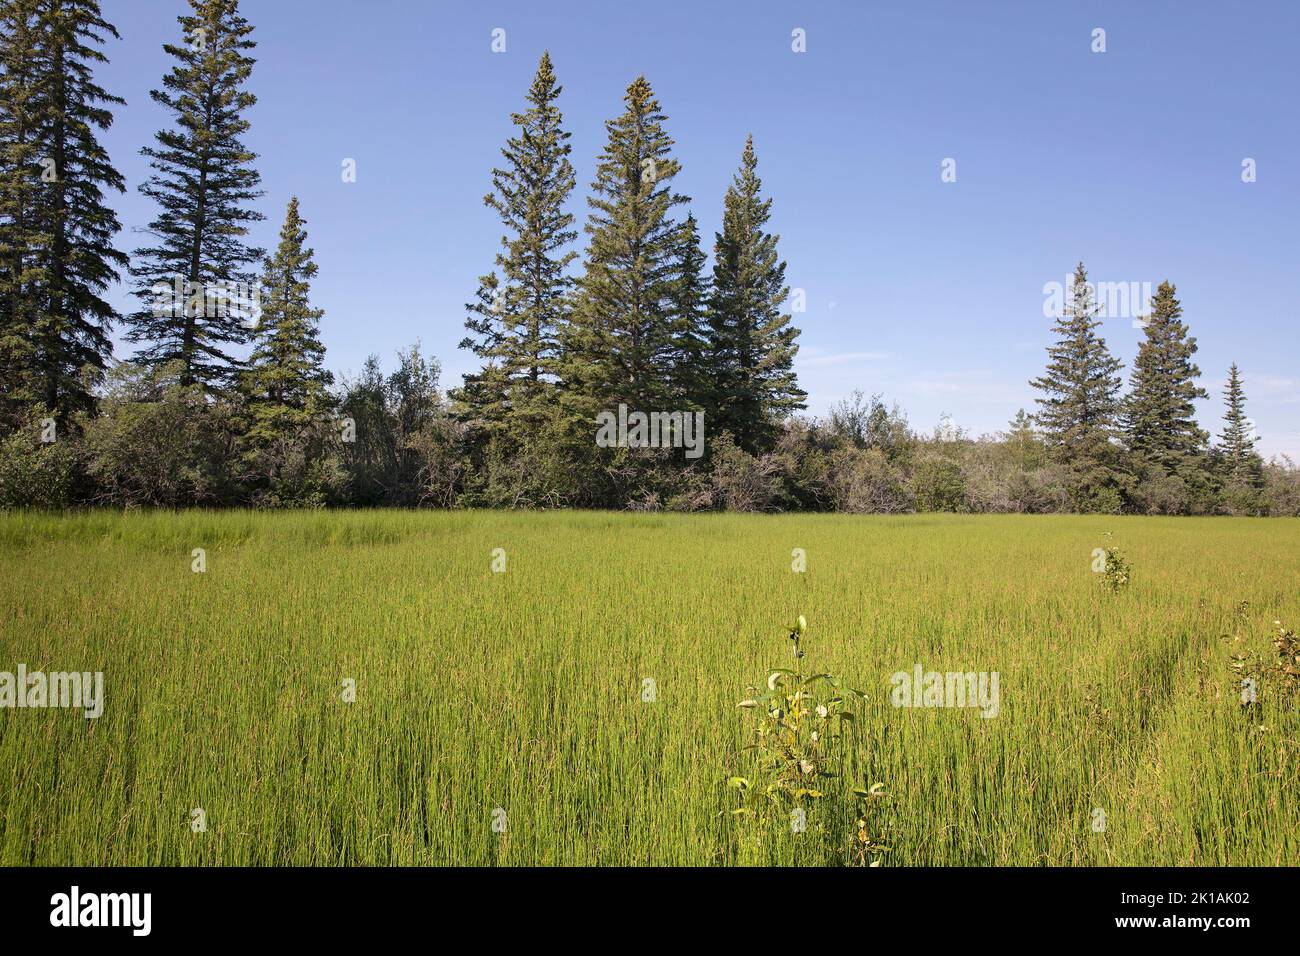 Ecological succession in oxbow lake. Wetland floor is filled with Equisetum plants and trees are beginning to colonize from edge of surrounding forest Stock Photo